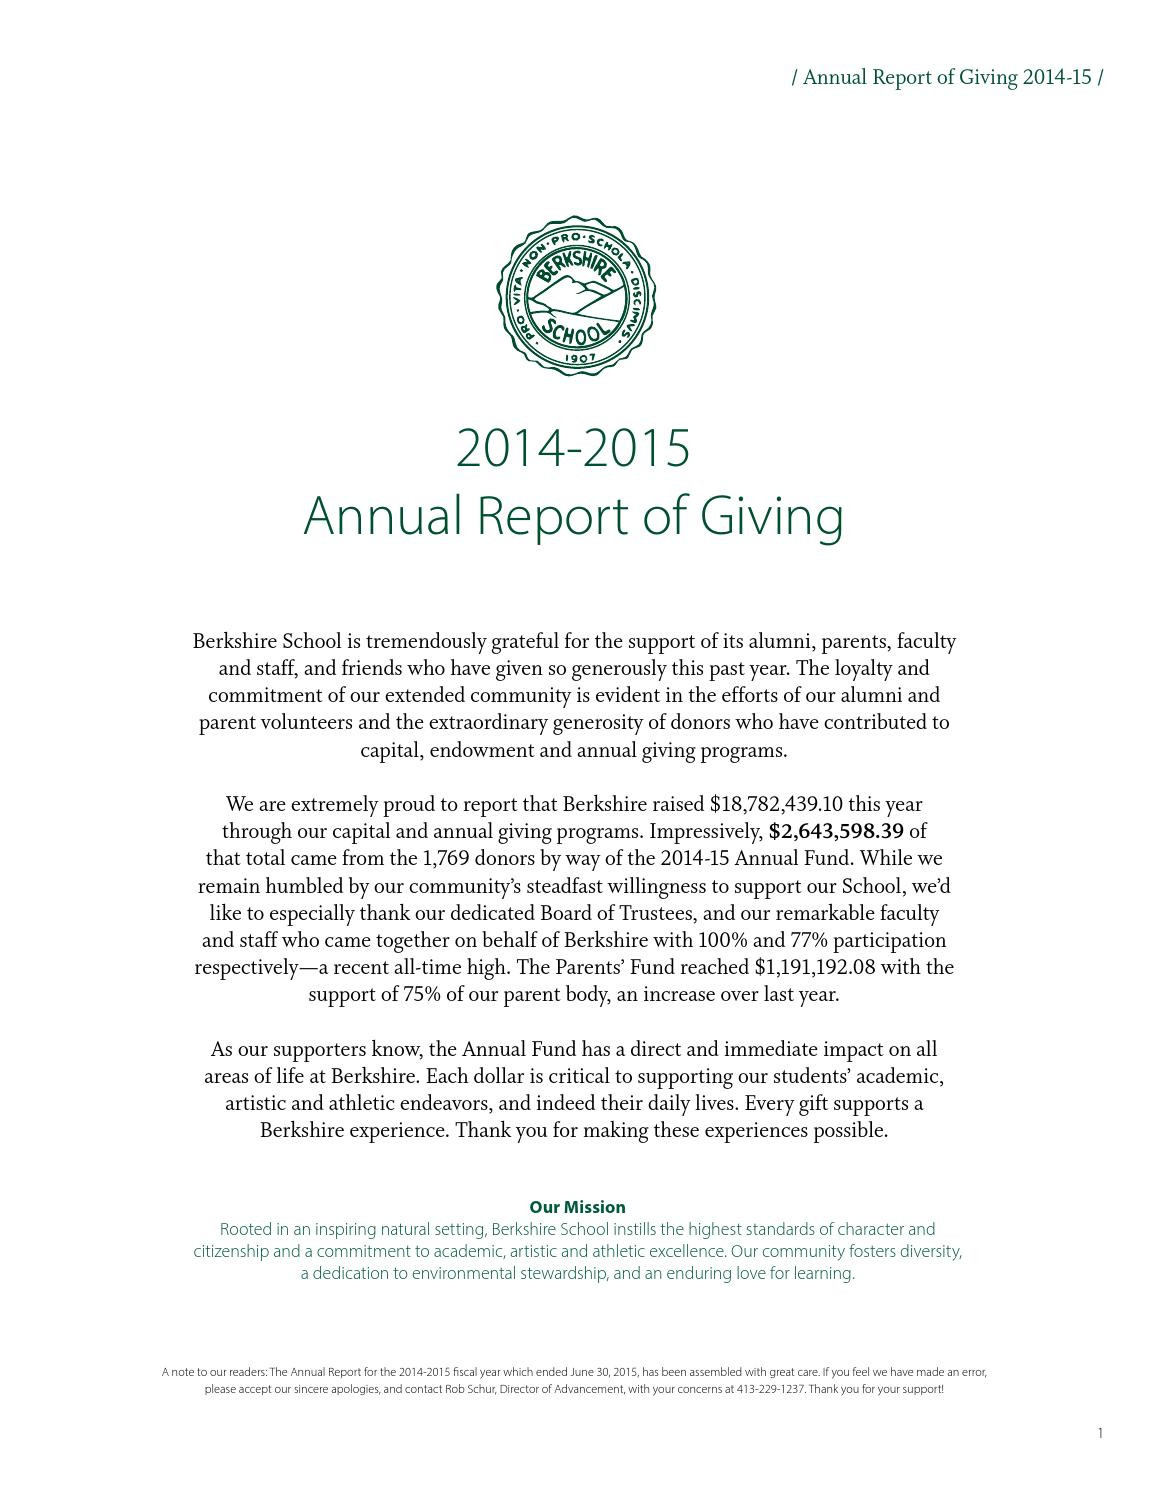 Set Builder Notation Worksheet Annual Report Of Giving 2014 2015 by Berkshire School issuu